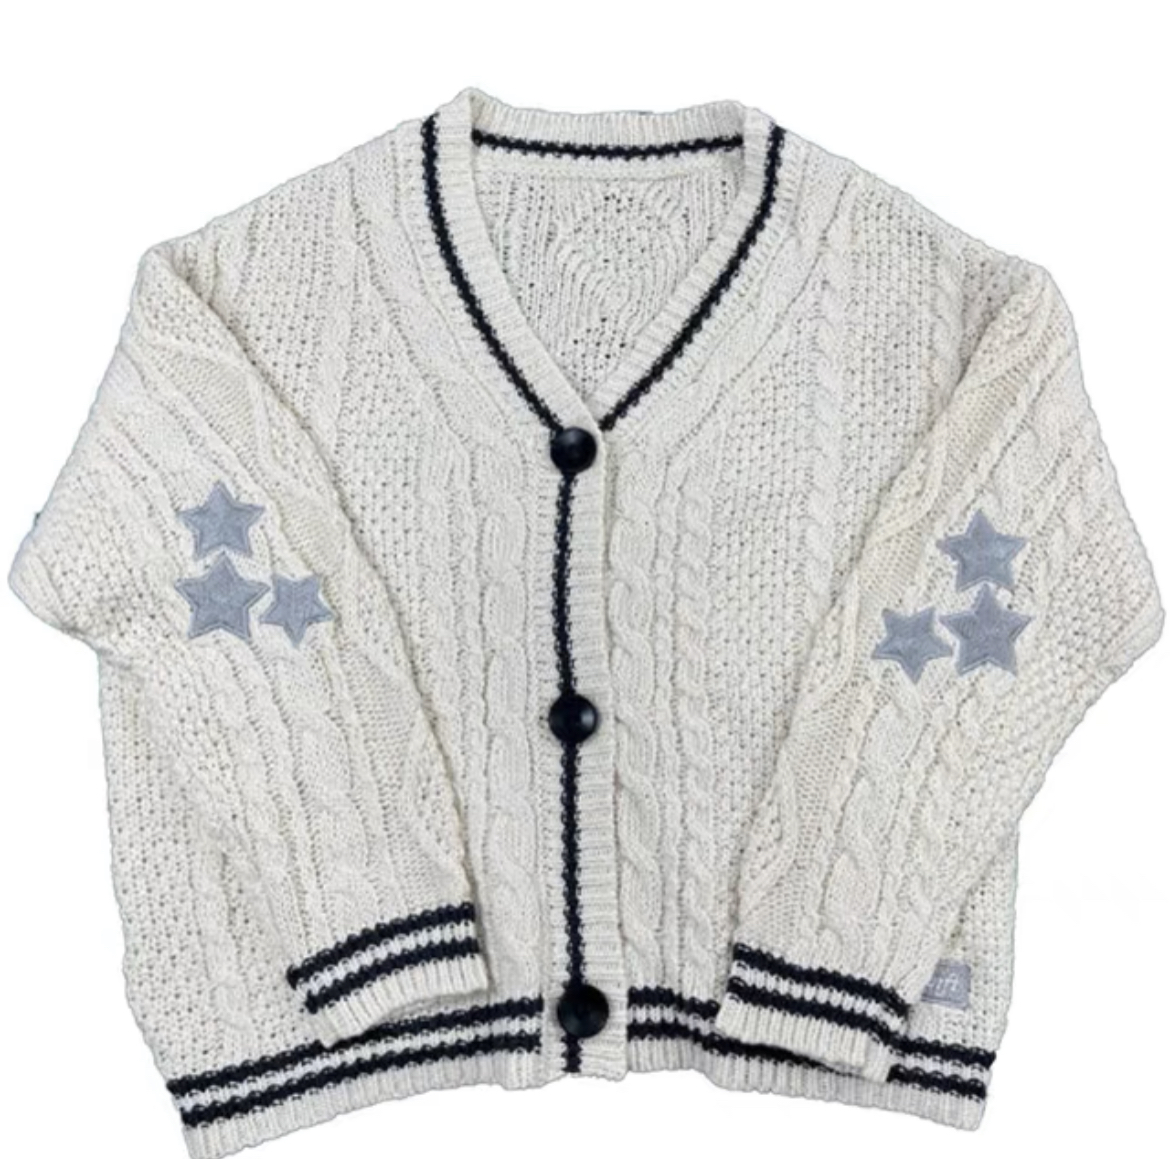 five-pointed star Temperamentloose casual sweater cardigan